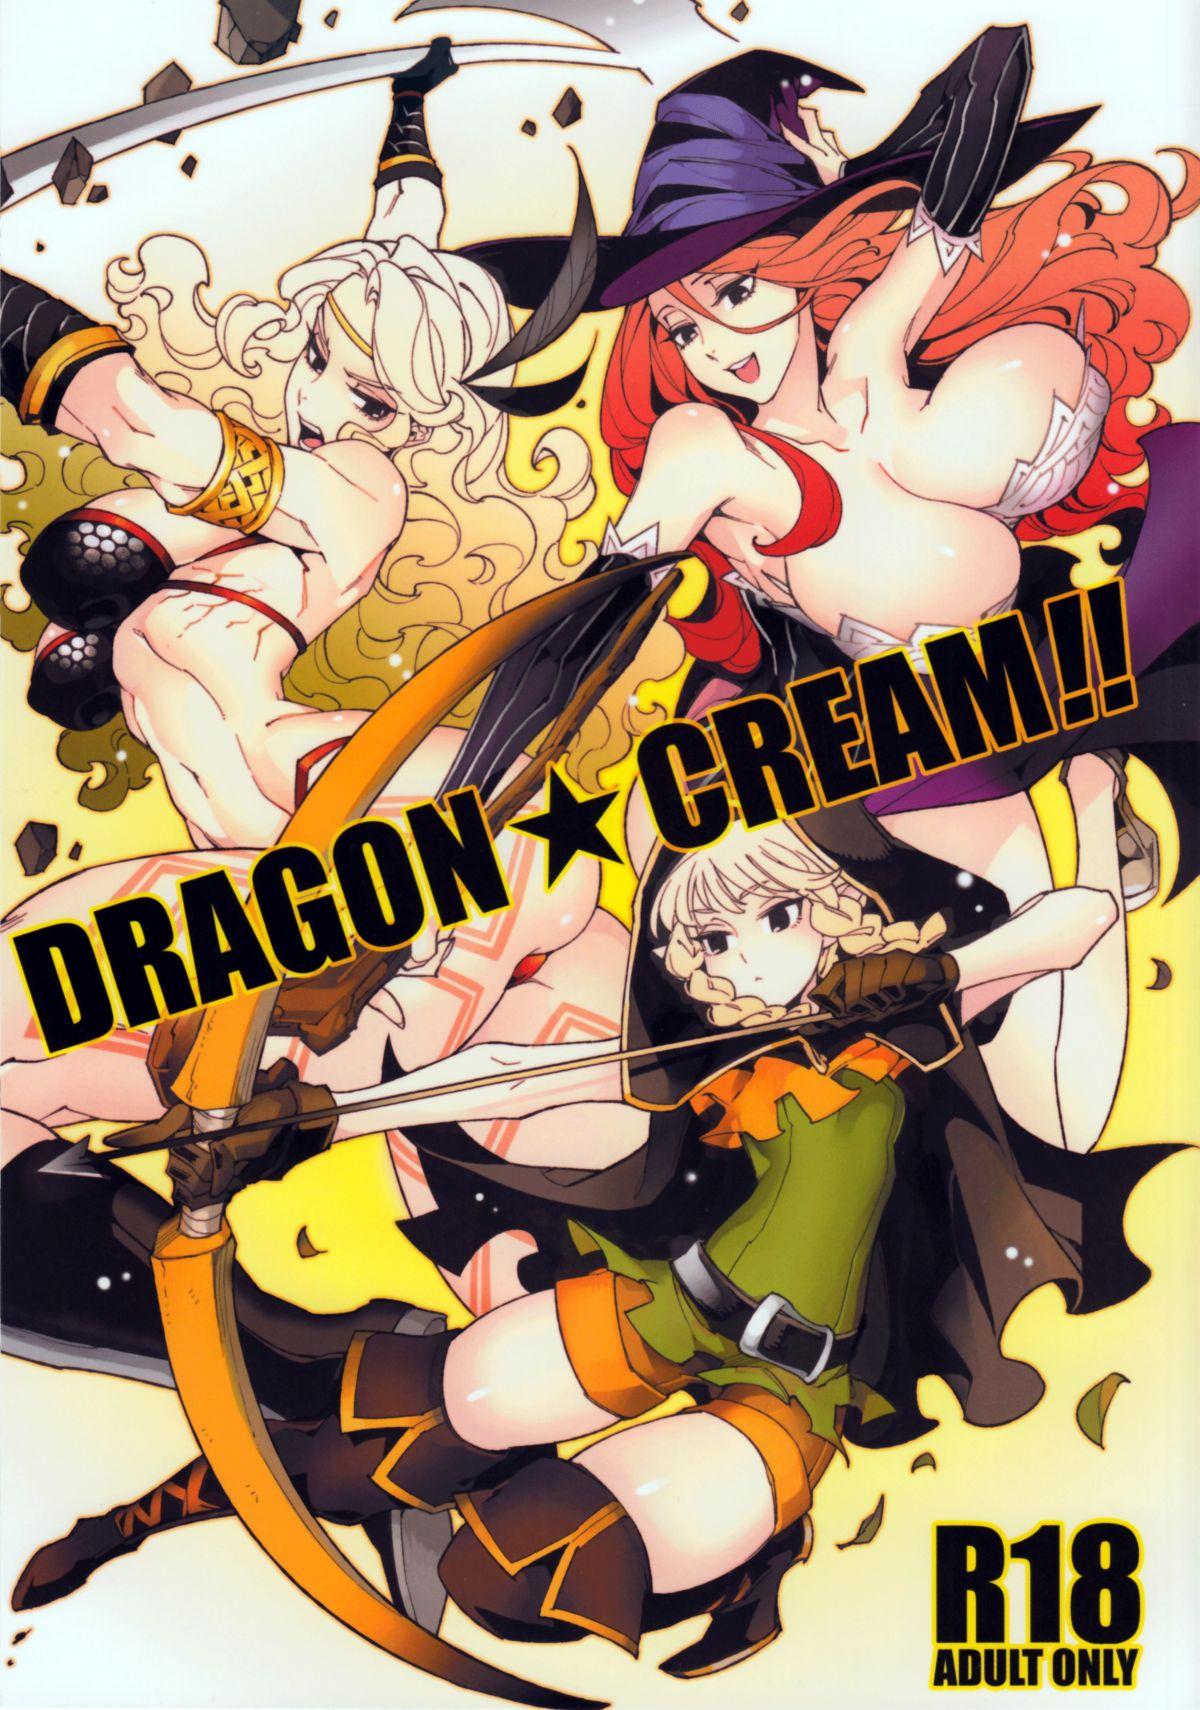 Hot Whores Dragon Cream!! - Dragons crown Real - Picture 1